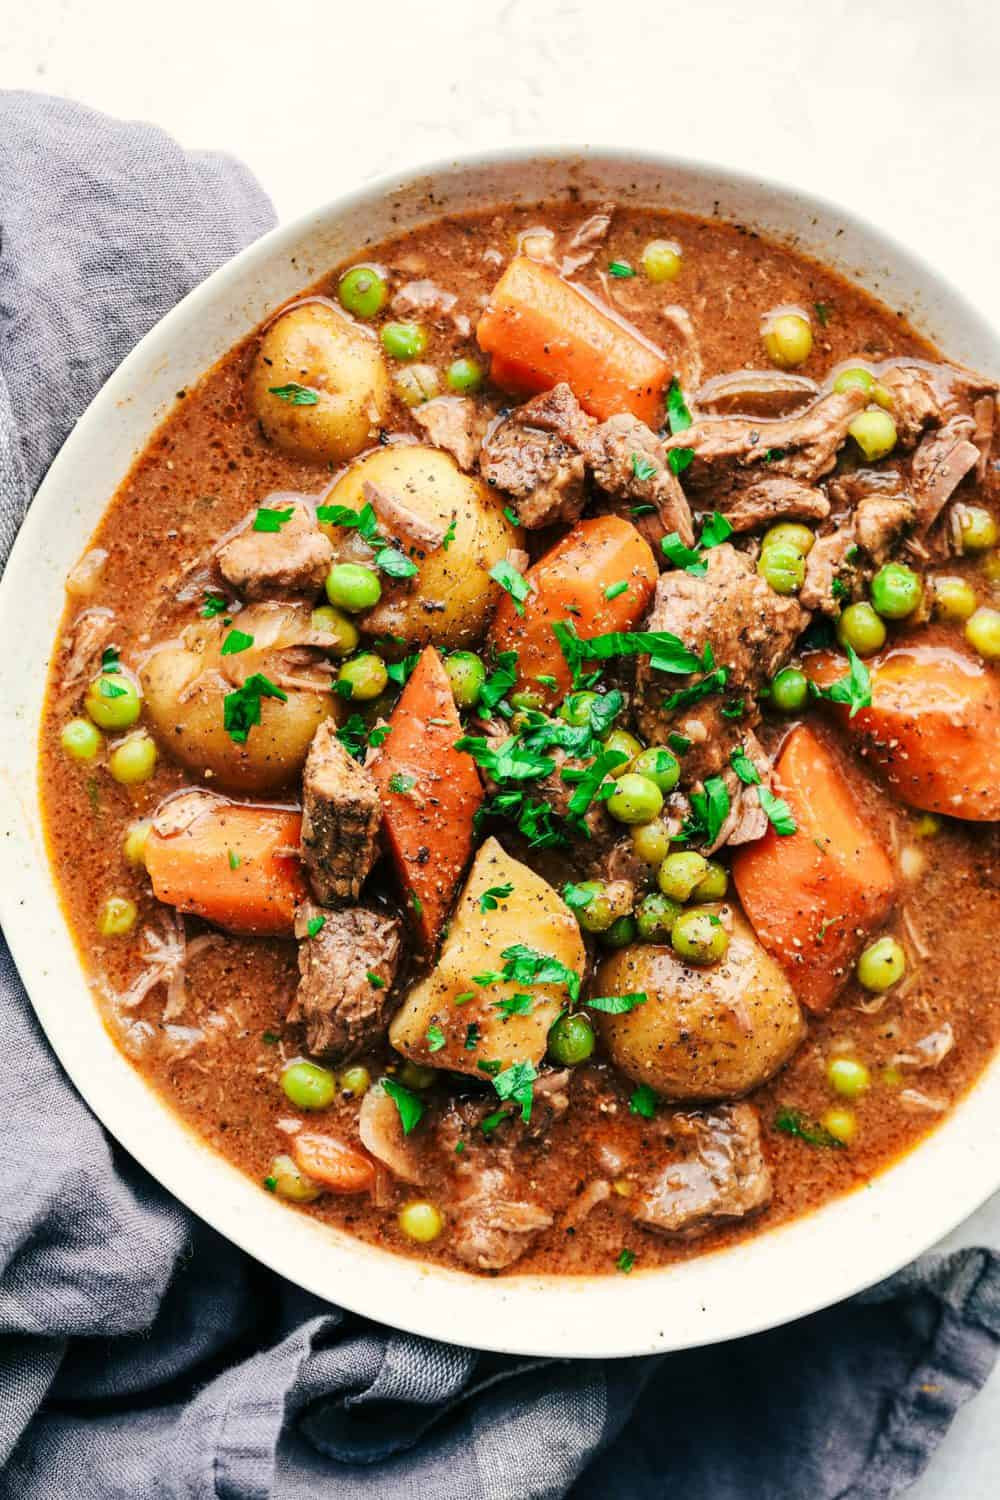 Recipes For Lamb Stew
 Best Ever Slow Cooker Beef Stew